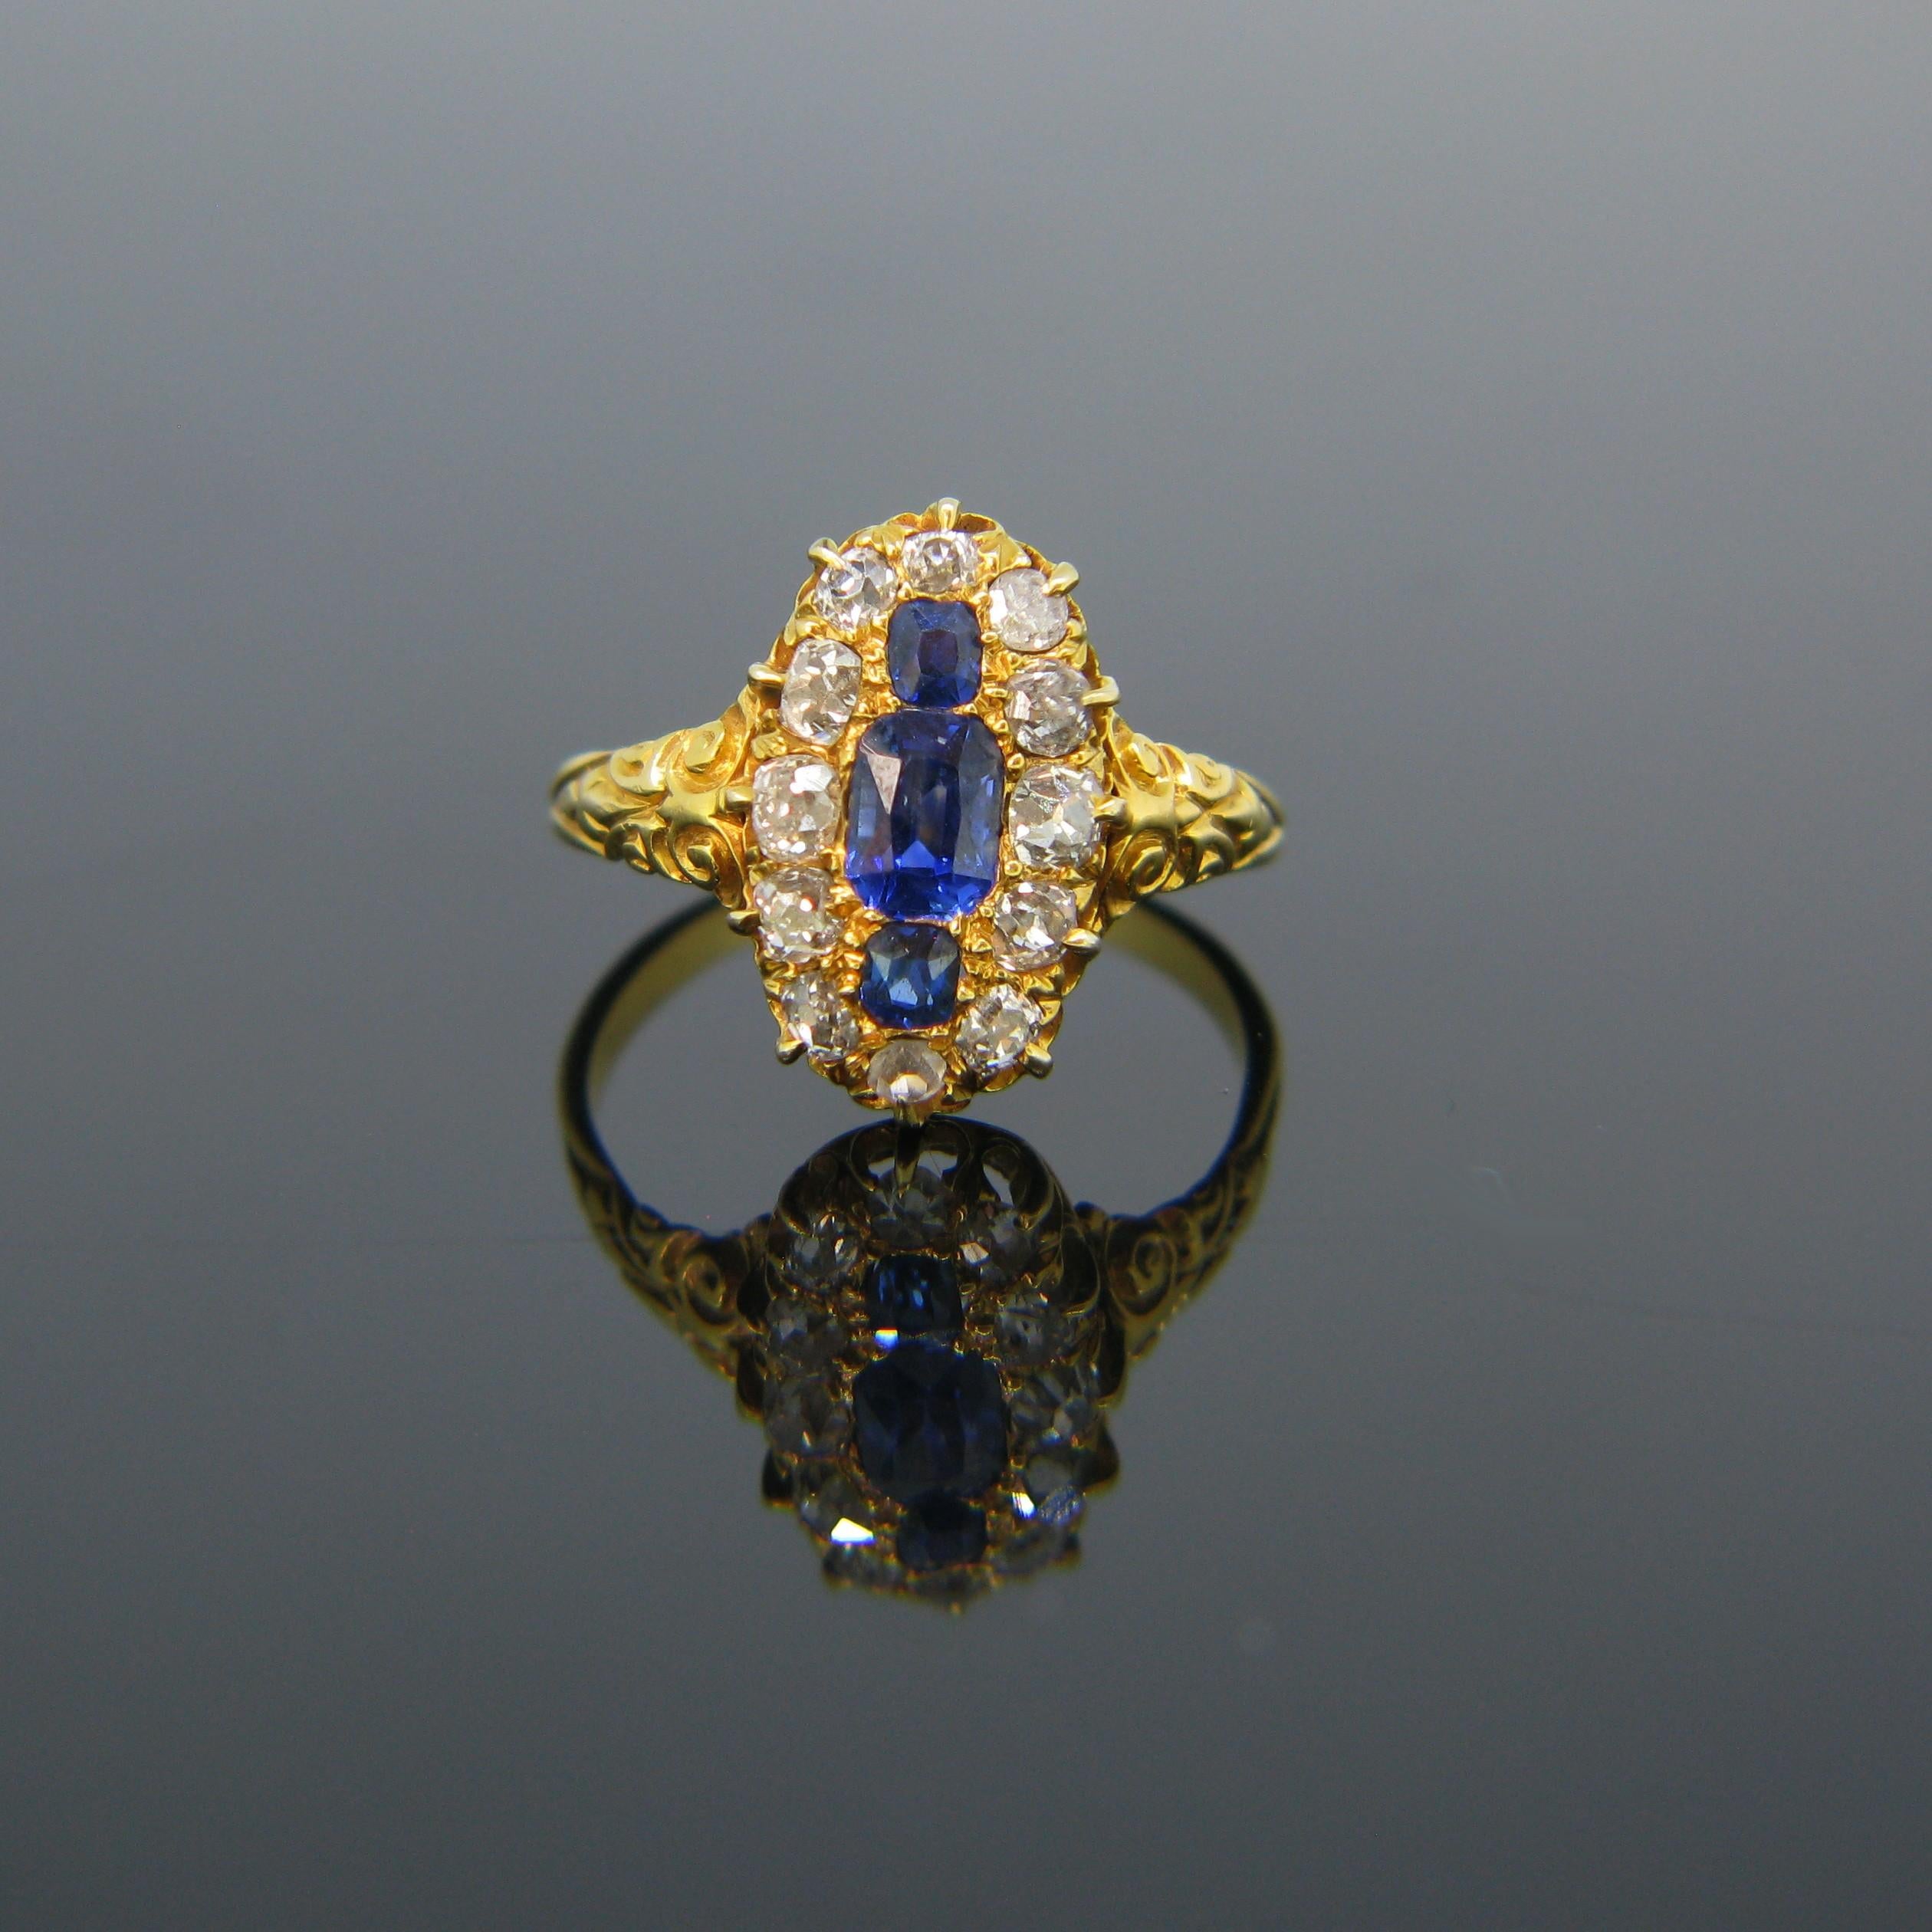 This beautiful marquise ring from the Victorian era is fully made in 18kt yellow gold. In the centre, it is with 3 rectangular cushion sapphires of Burmese origin and no indications of heating. They have a very vibrant royal blue colour. They are